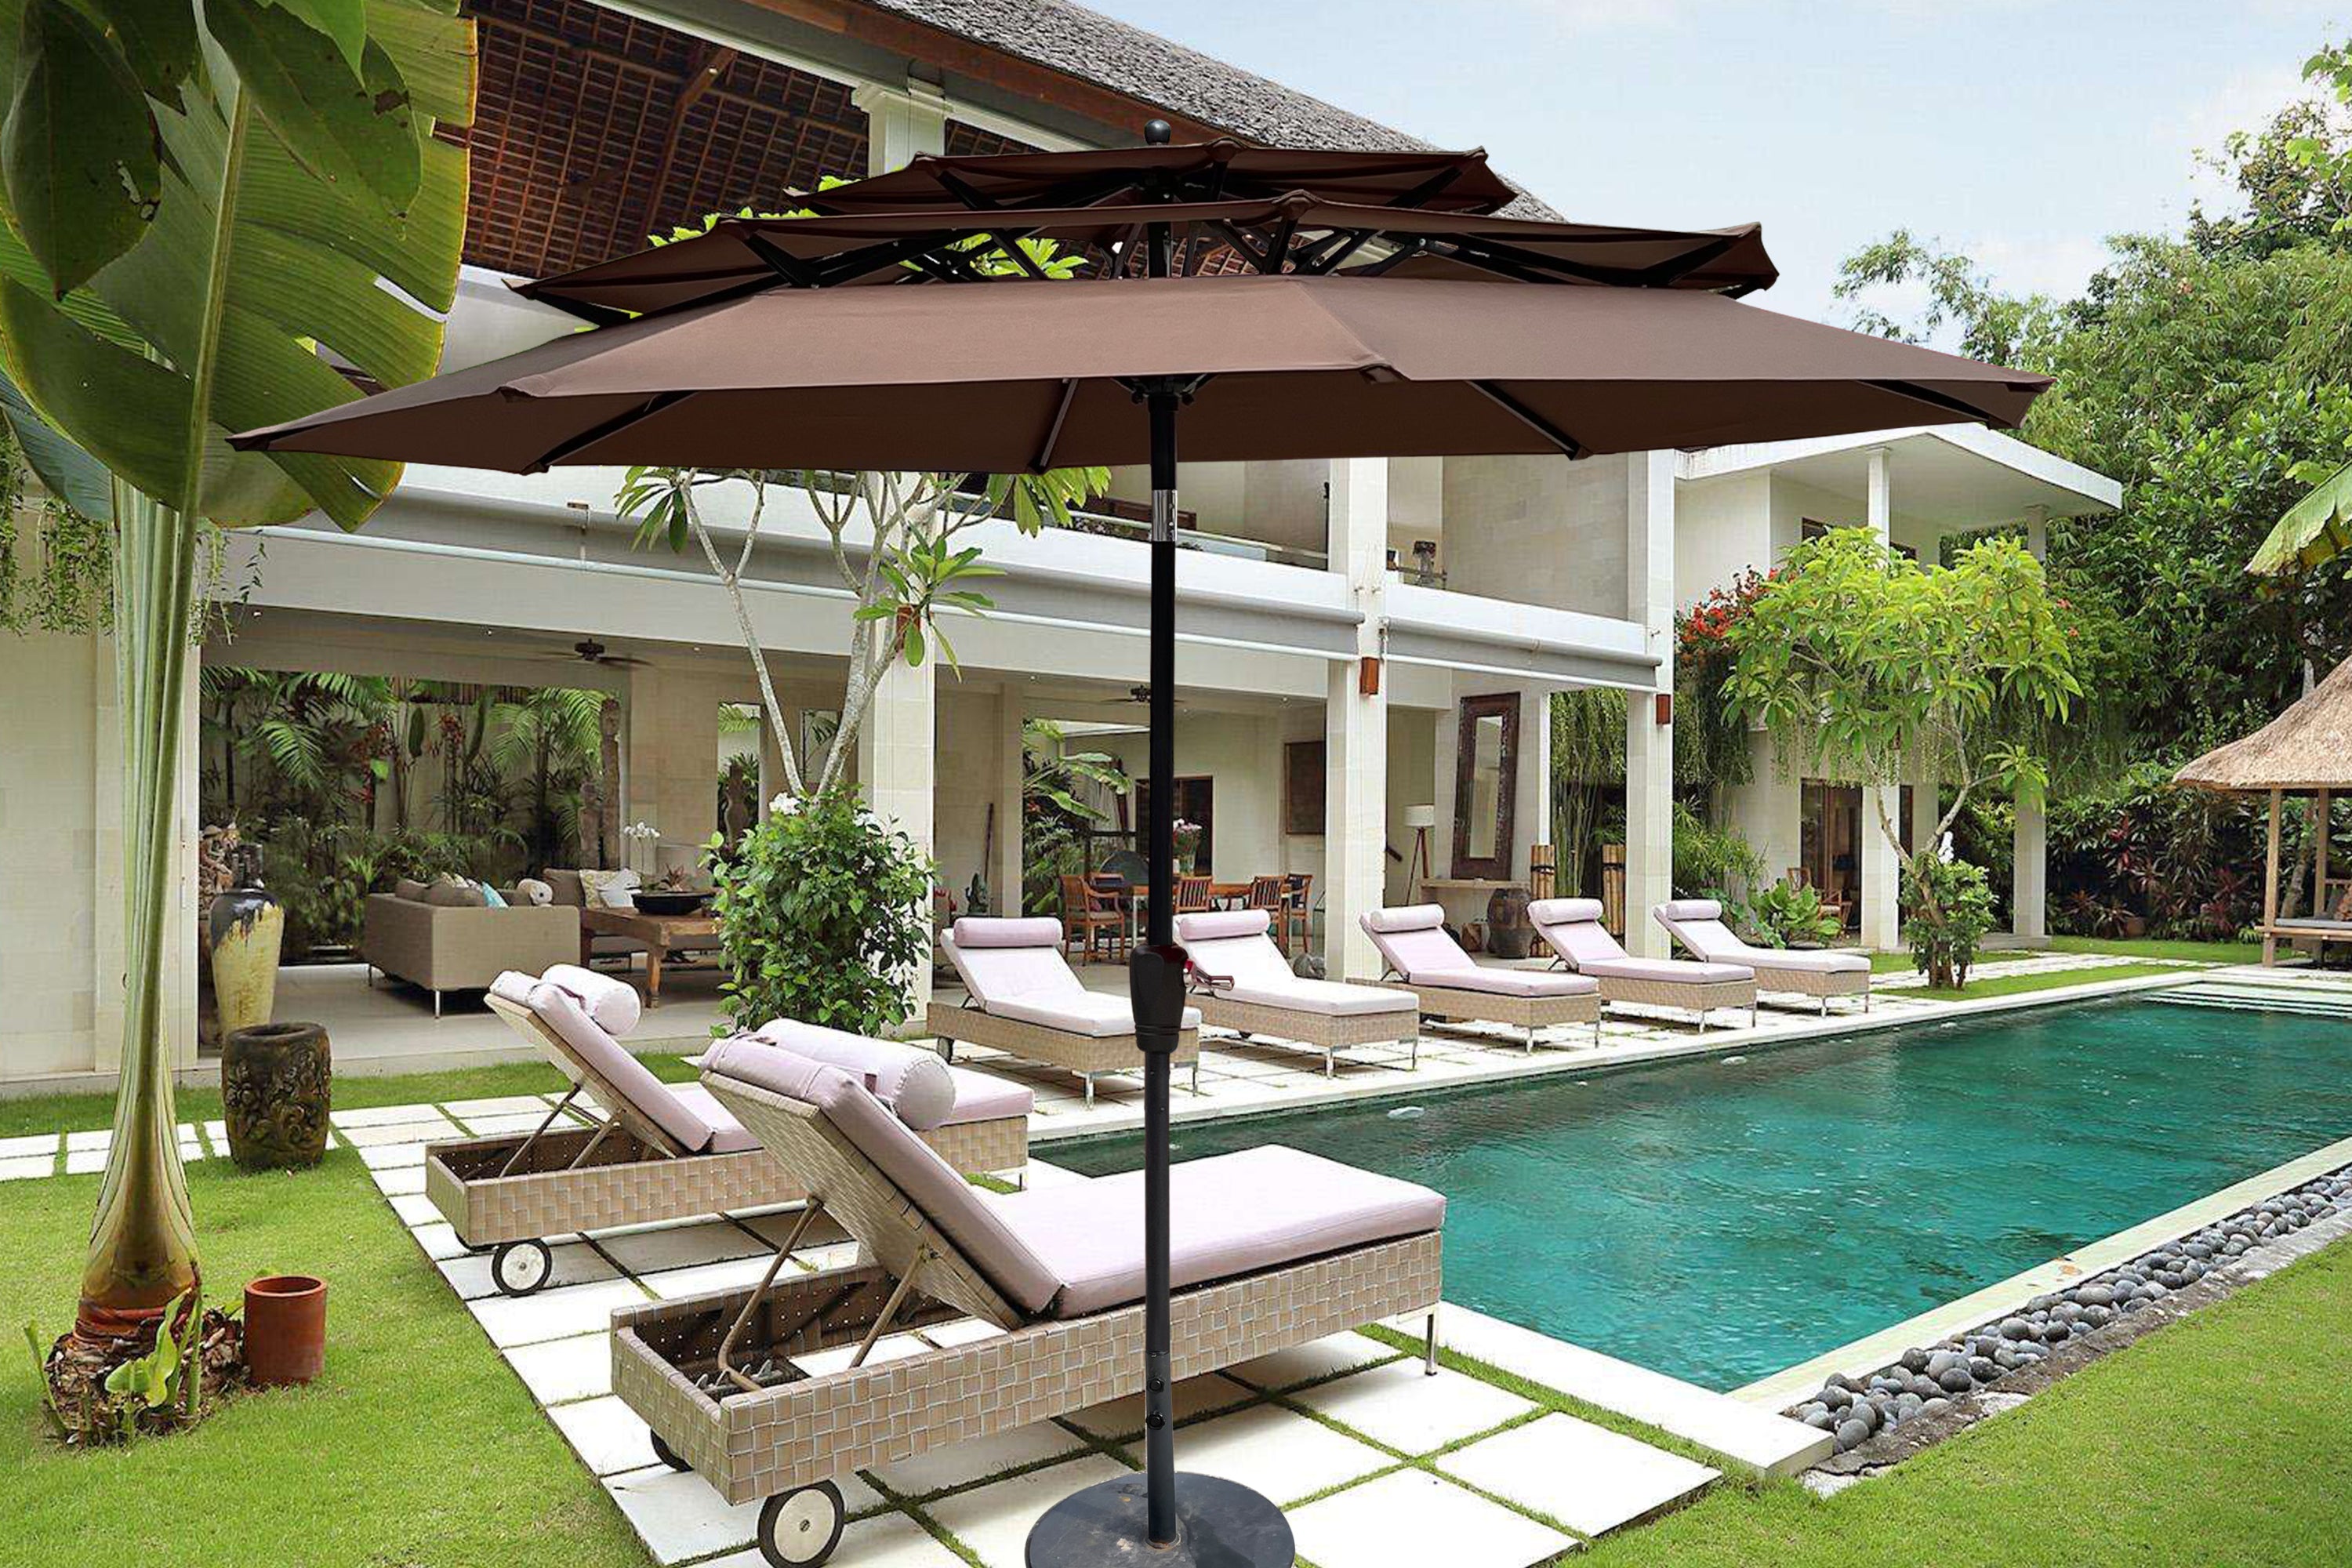 9Ft-3-Tiers-Outdoor-Patio--Umbrella-with-Crank-and-tilt-and-Wind-Vents-Umbrellas-&-Sunshades